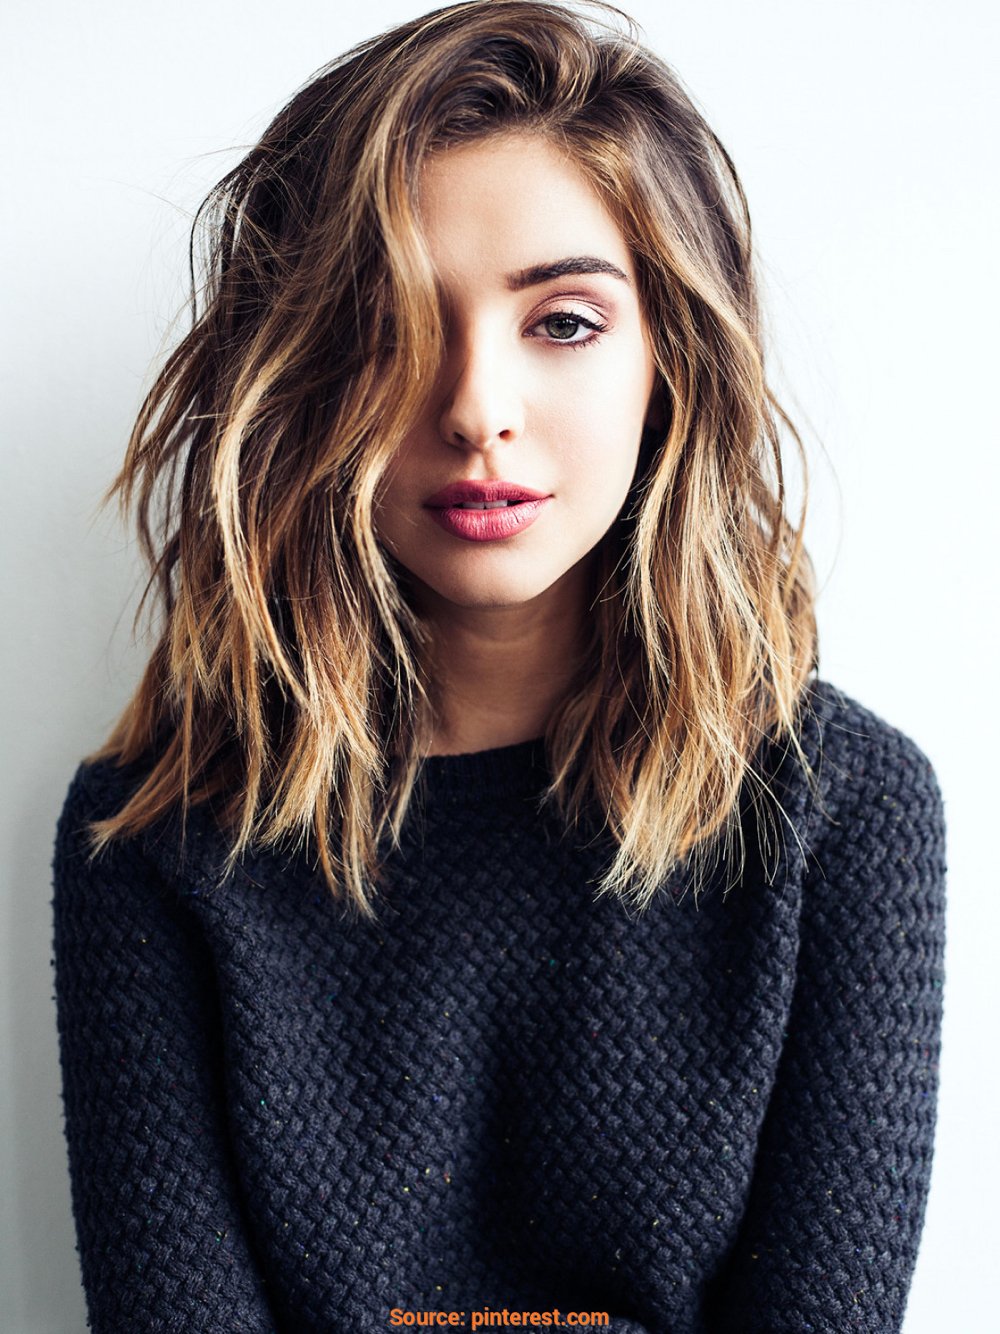 25 Easy Hairstyles for Short Hair for School - Short Haircuts